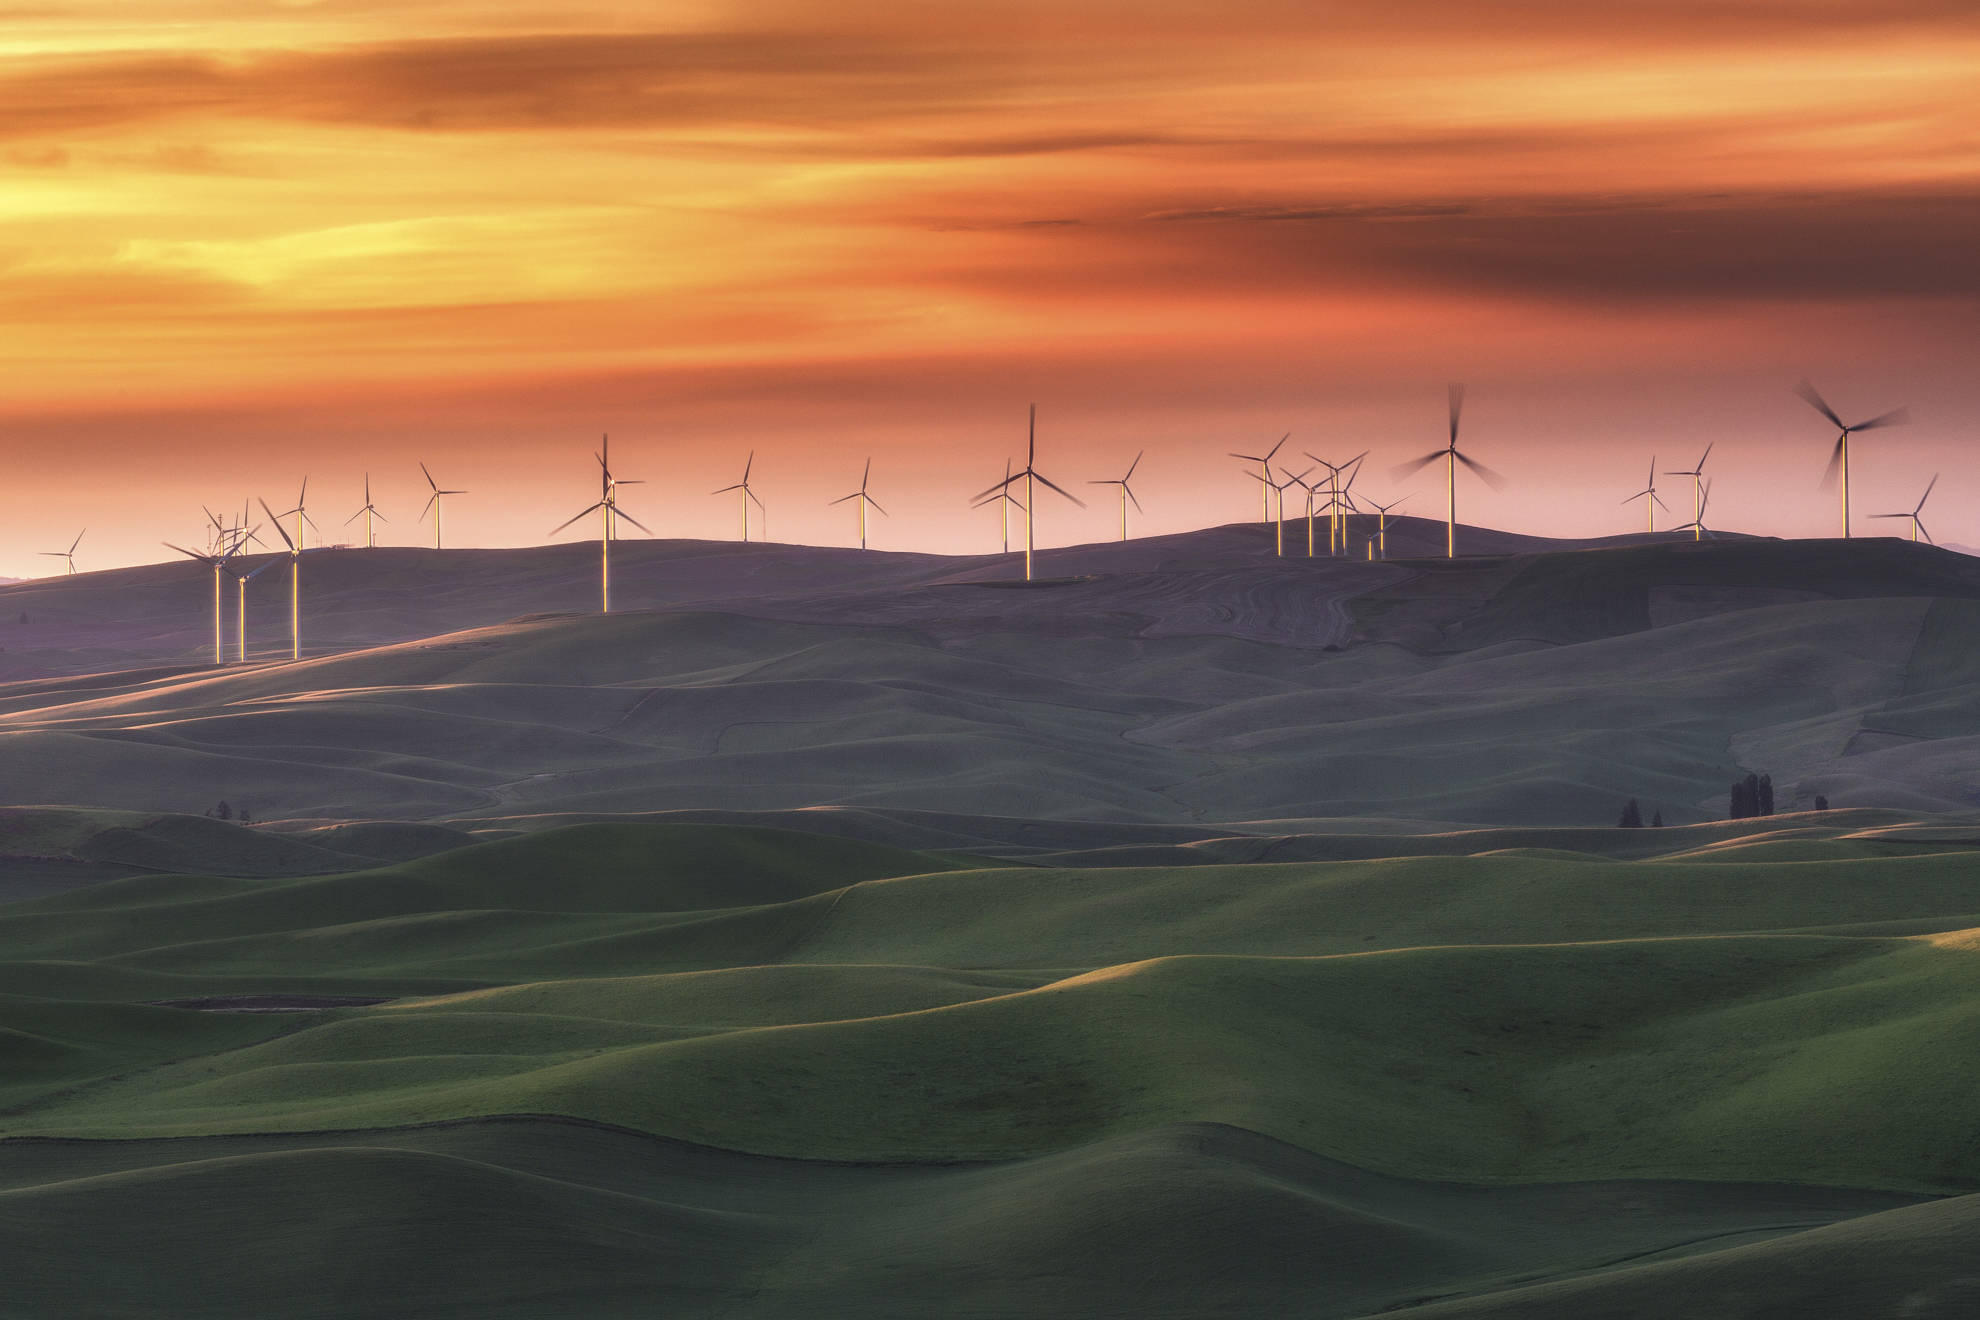 The Palouse Wind Farm in eastern Washington. Photo by Chris Weber, Flickr Creative Commons